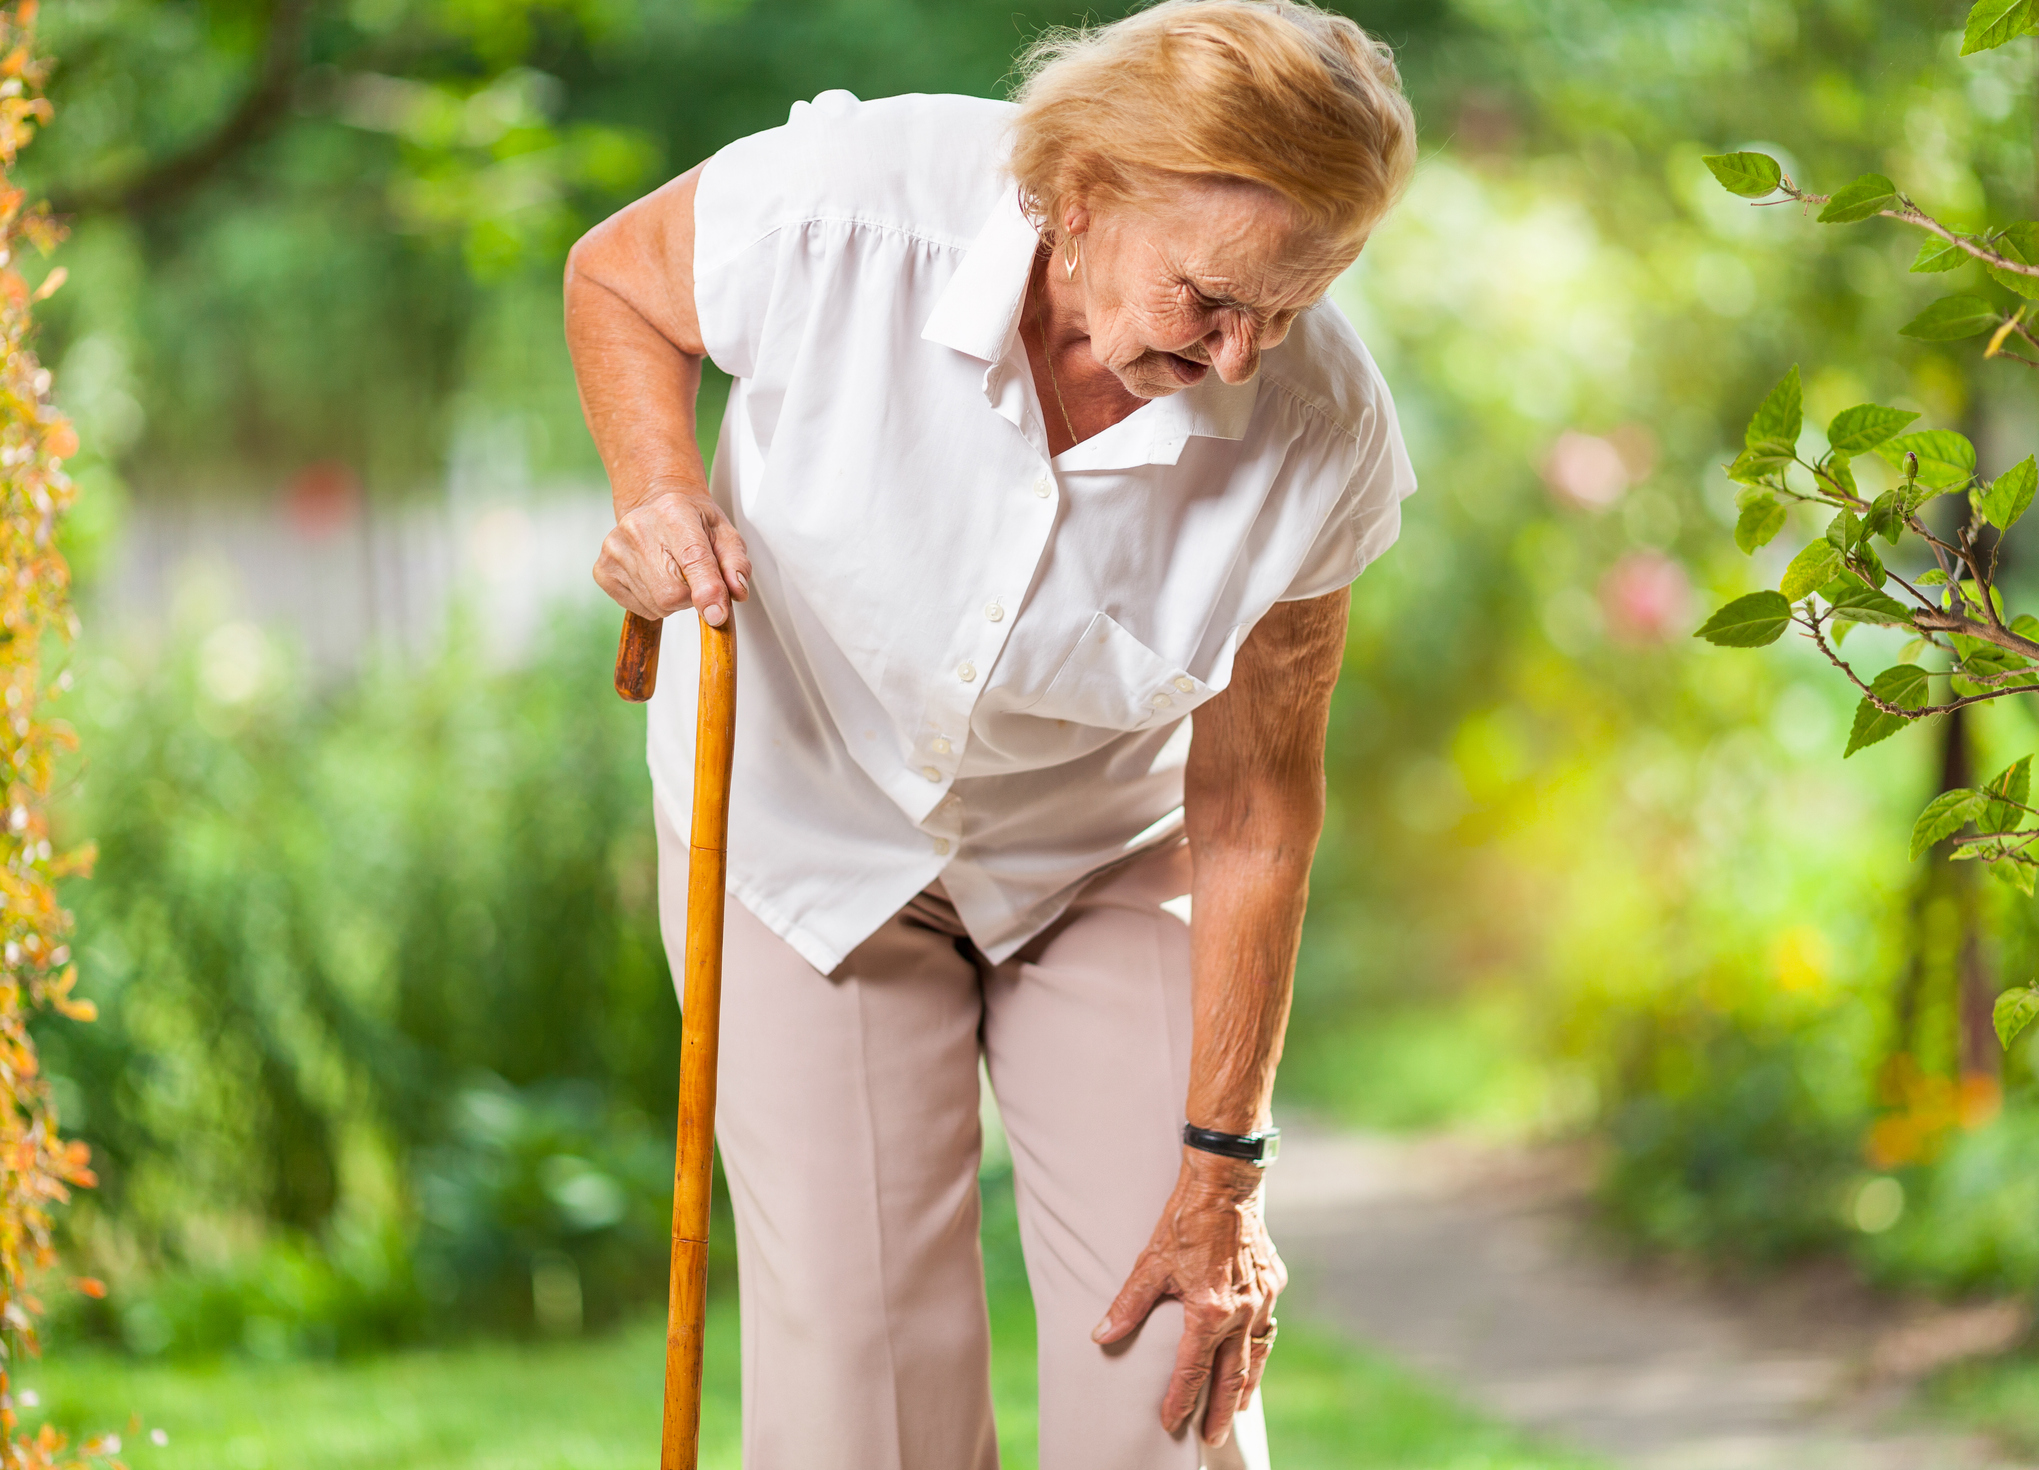 Stiff knee pain from osteoarthritis can make seniors unstable and at greater risk for falls.